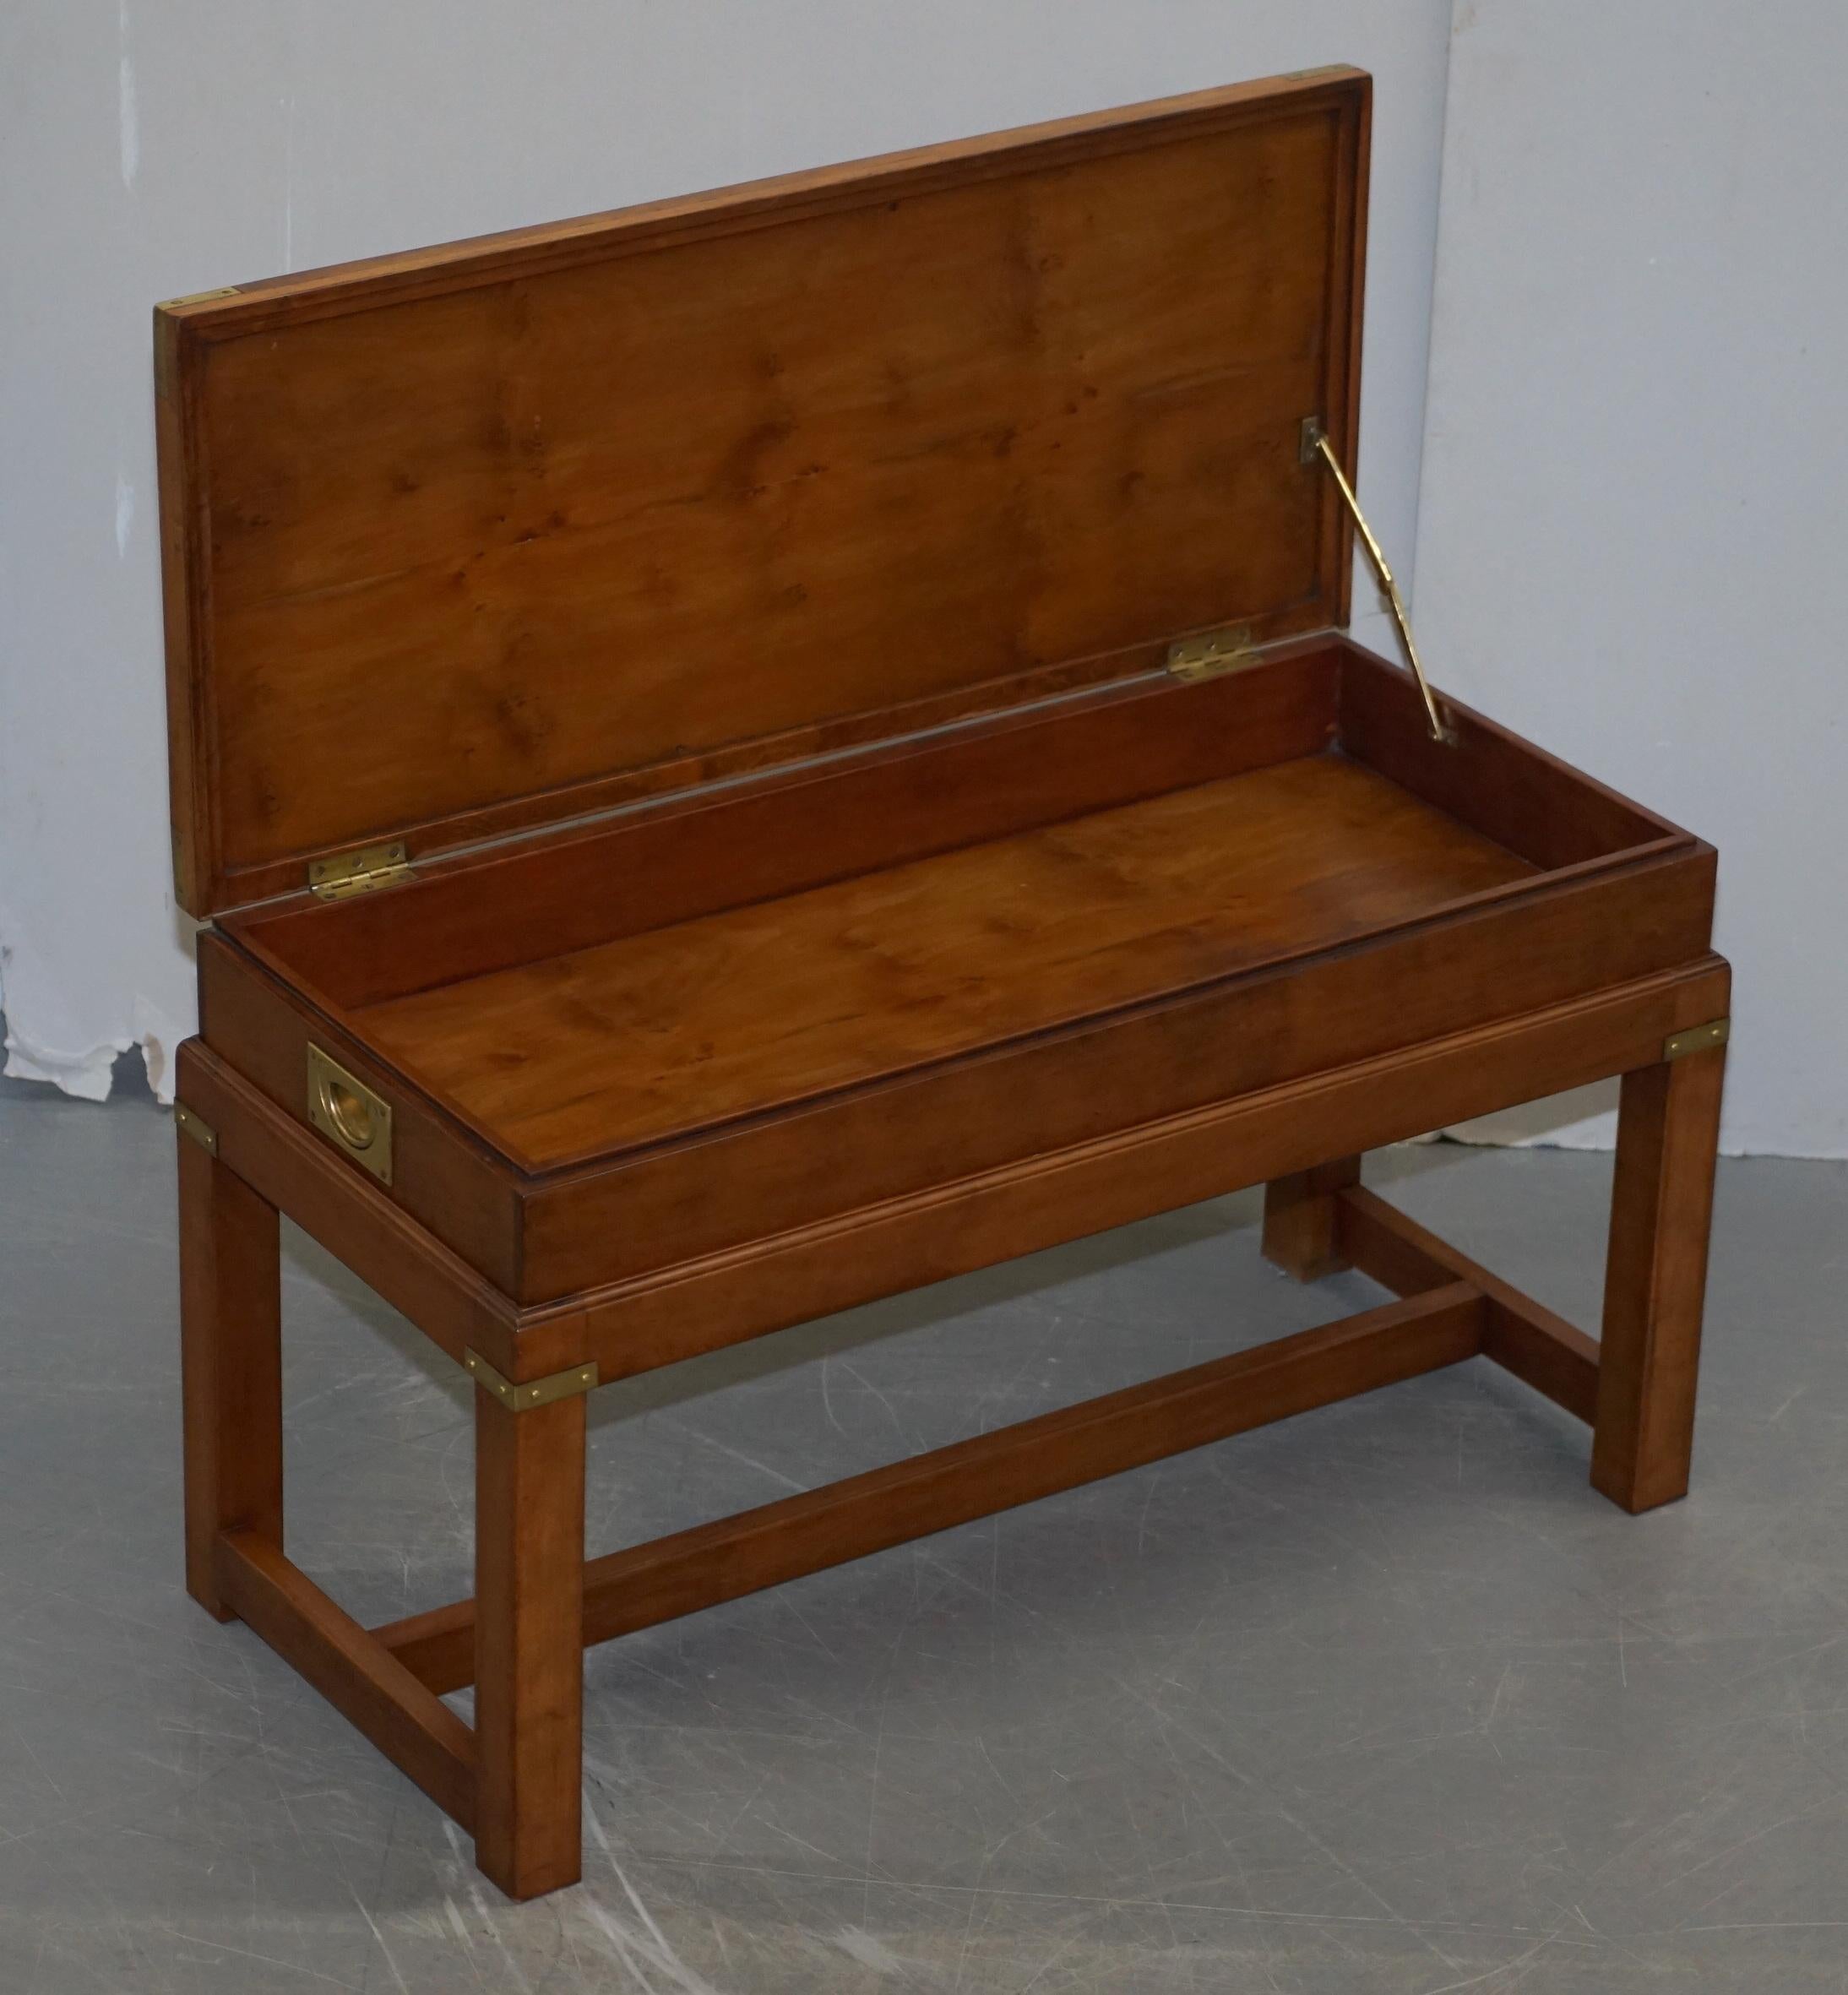 Rare Burr Yew Wood Military Campaign Gun Case Coffee Side Table on Original Base For Sale 9